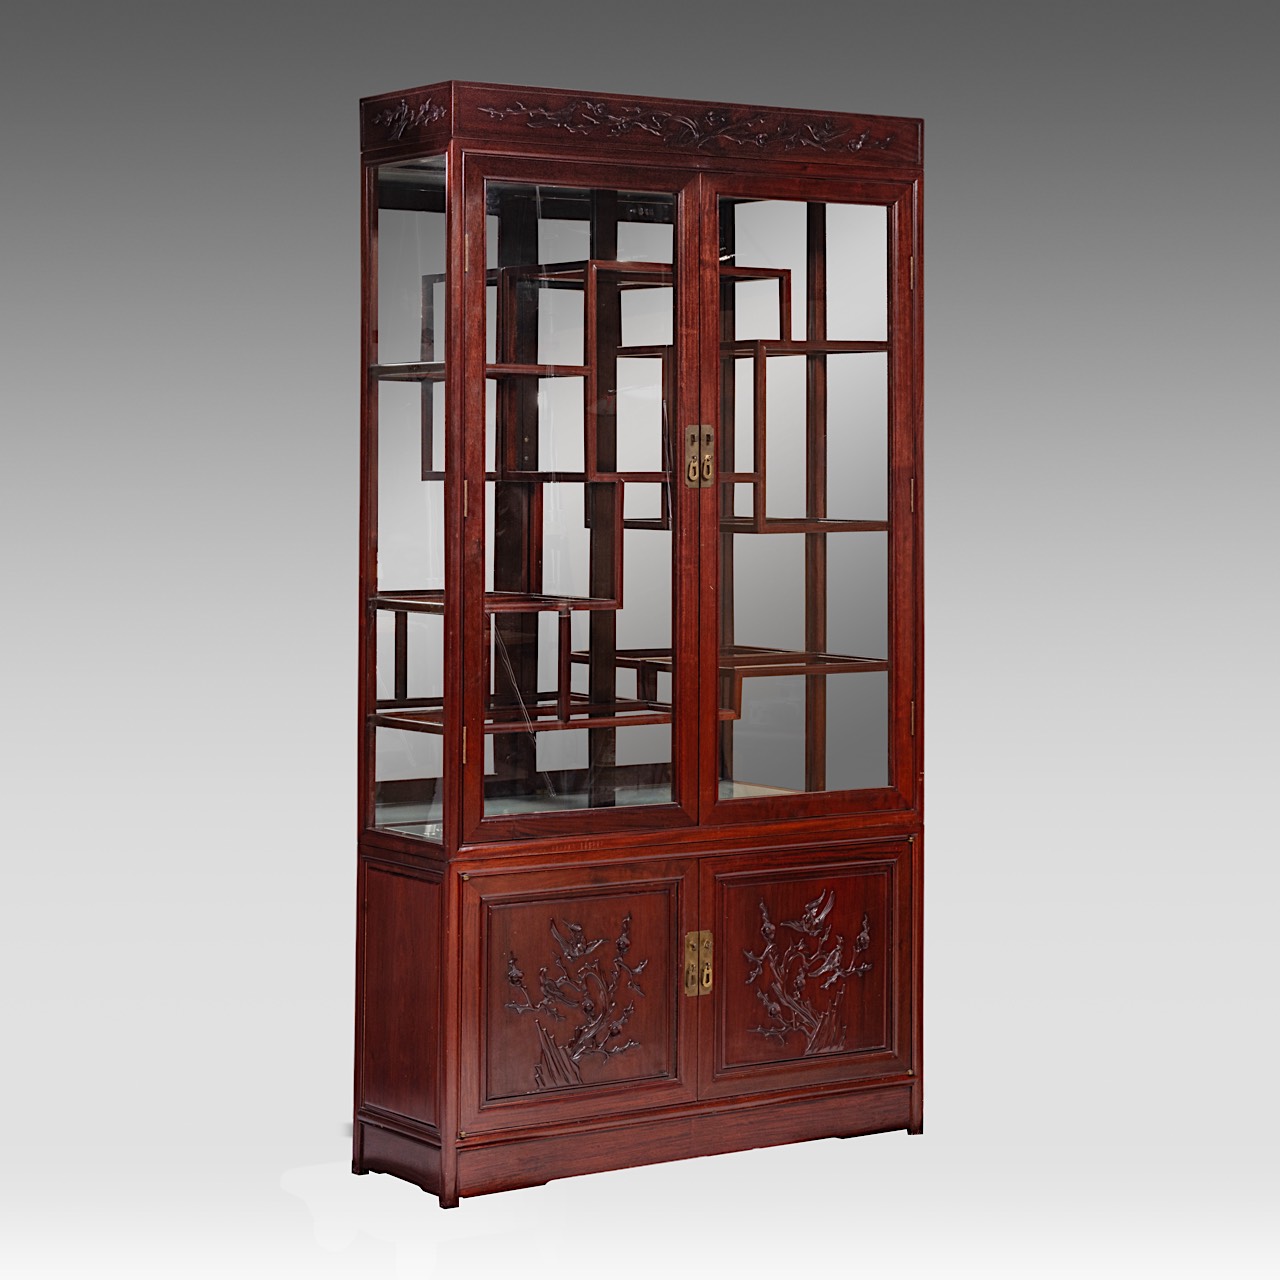 A Chinese hardwood display cabinet, with glass doors, 20thC, H 192 - W 102 - 33,5 cm - Bild 2 aus 5